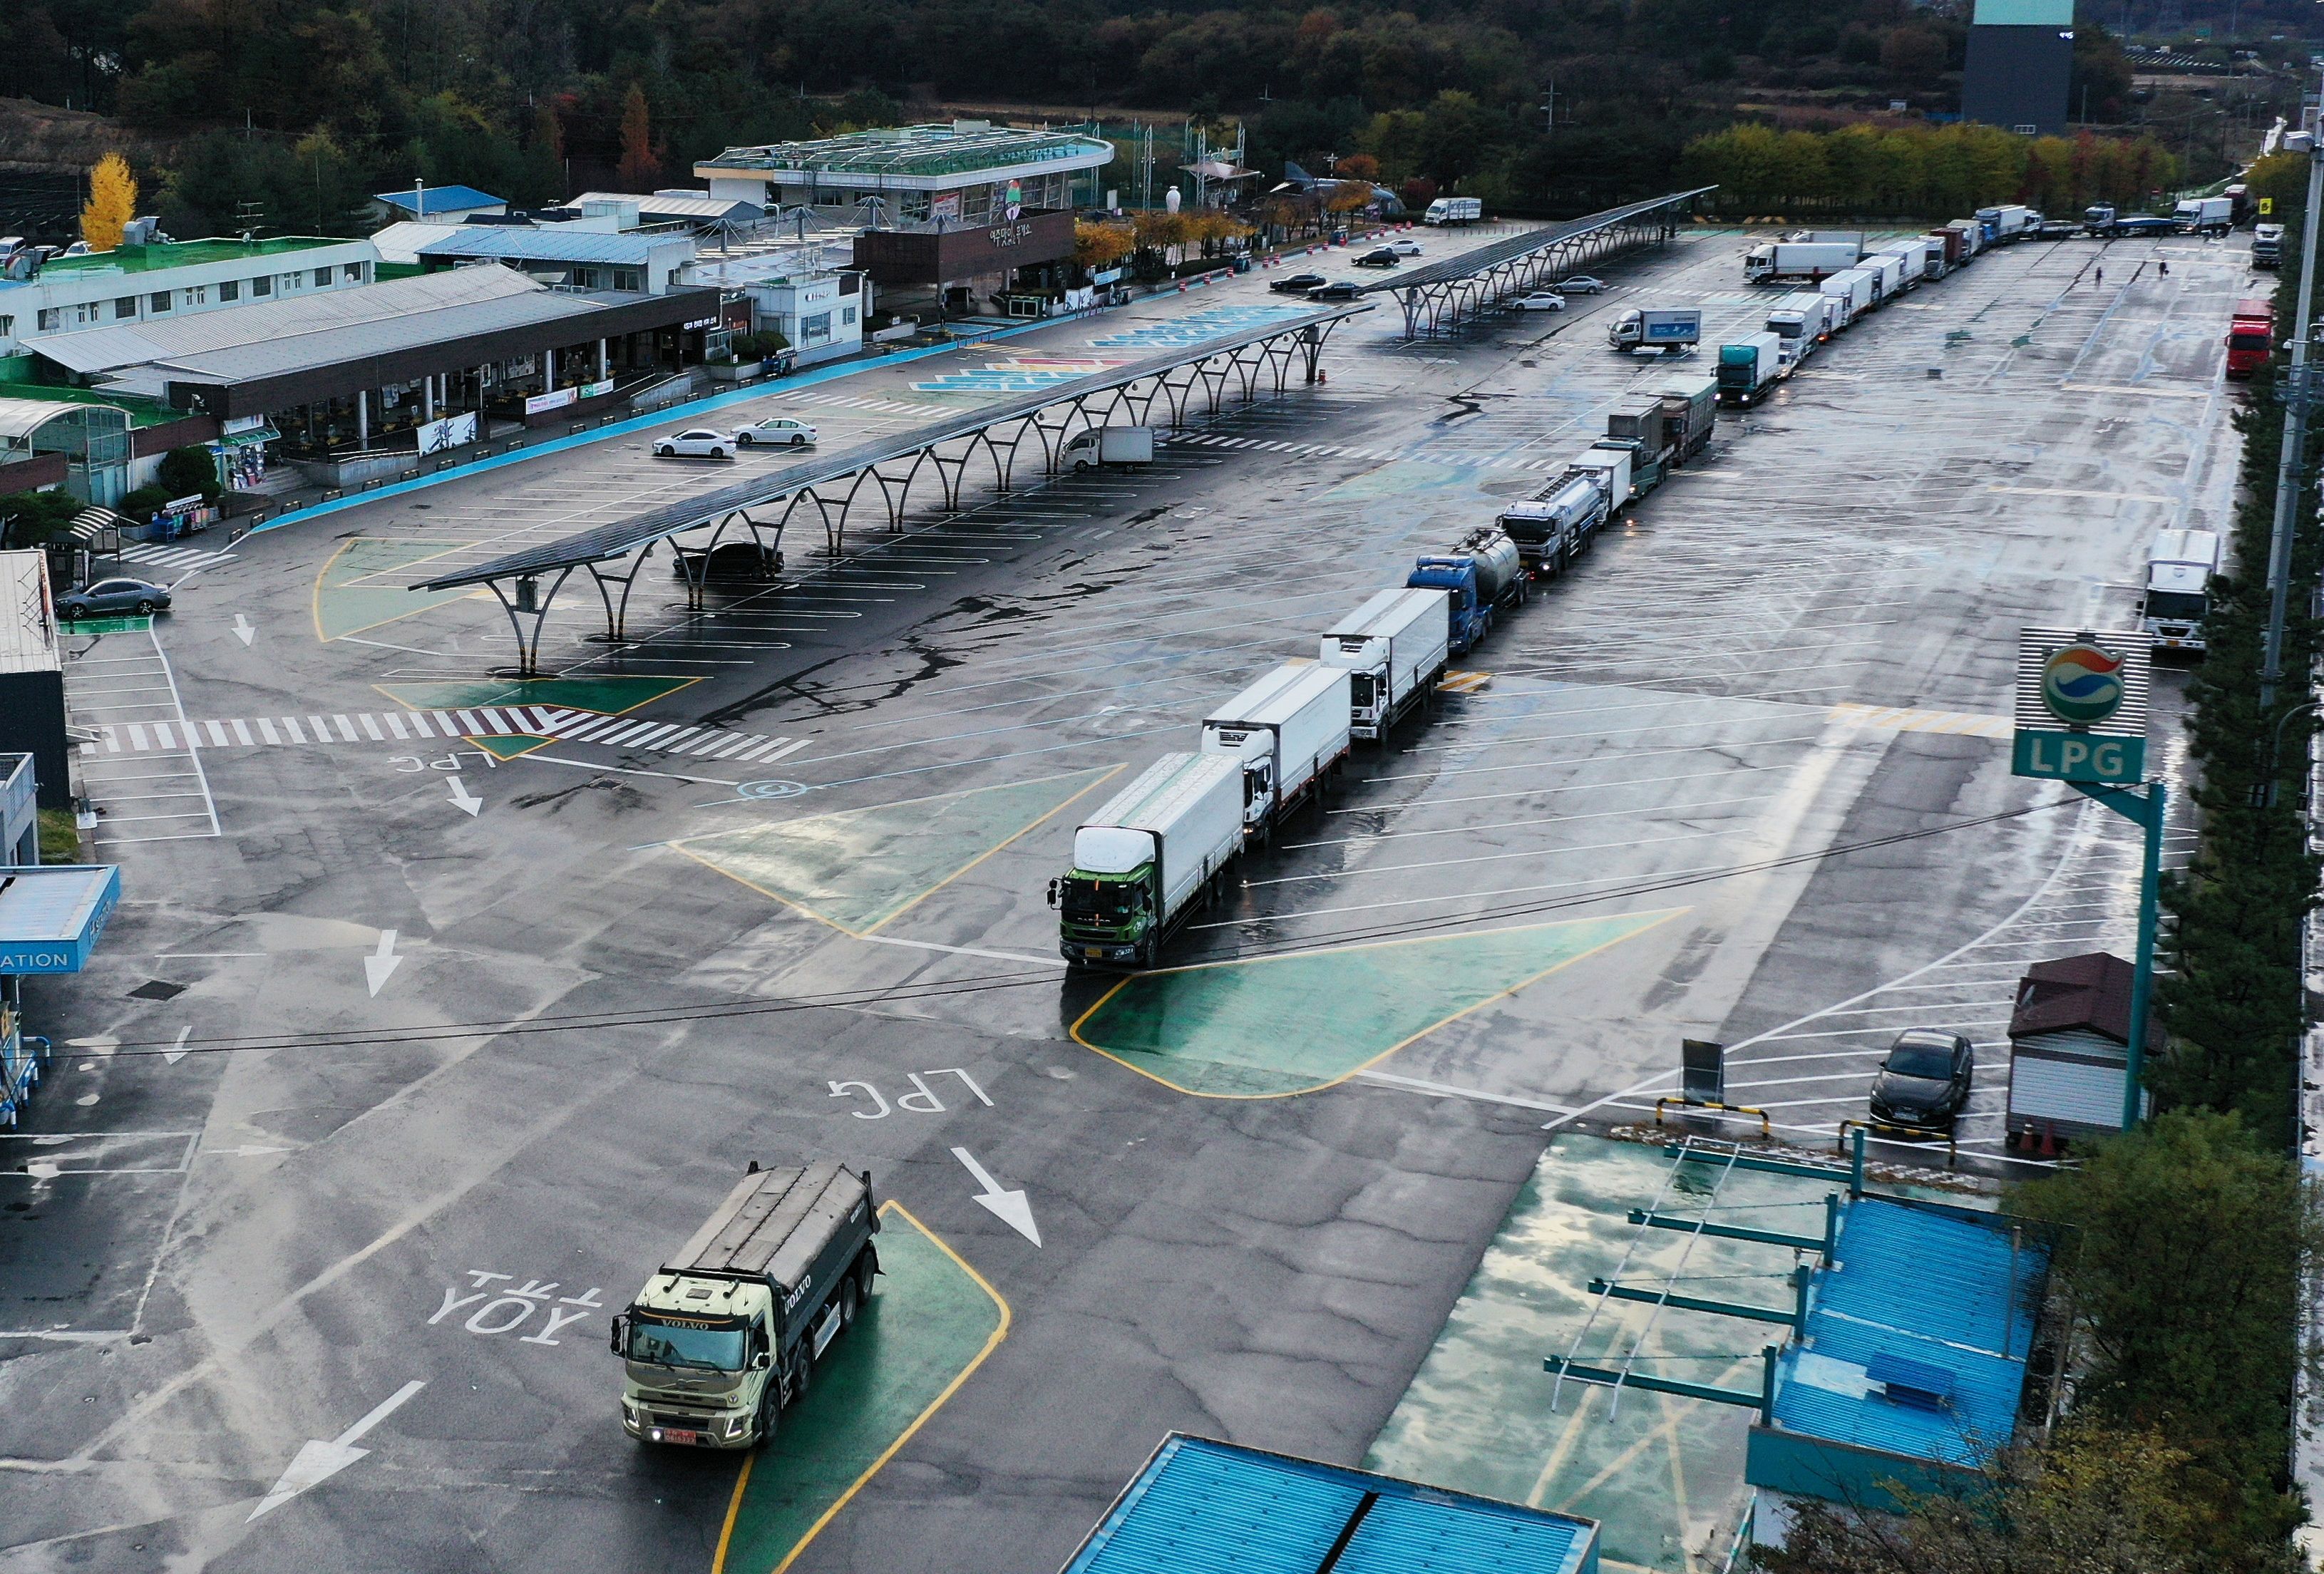 Trucks wait in a line to get urea at a service area in Yeoju, South Korea, November 8, 2021. Yonhap via REUTERS